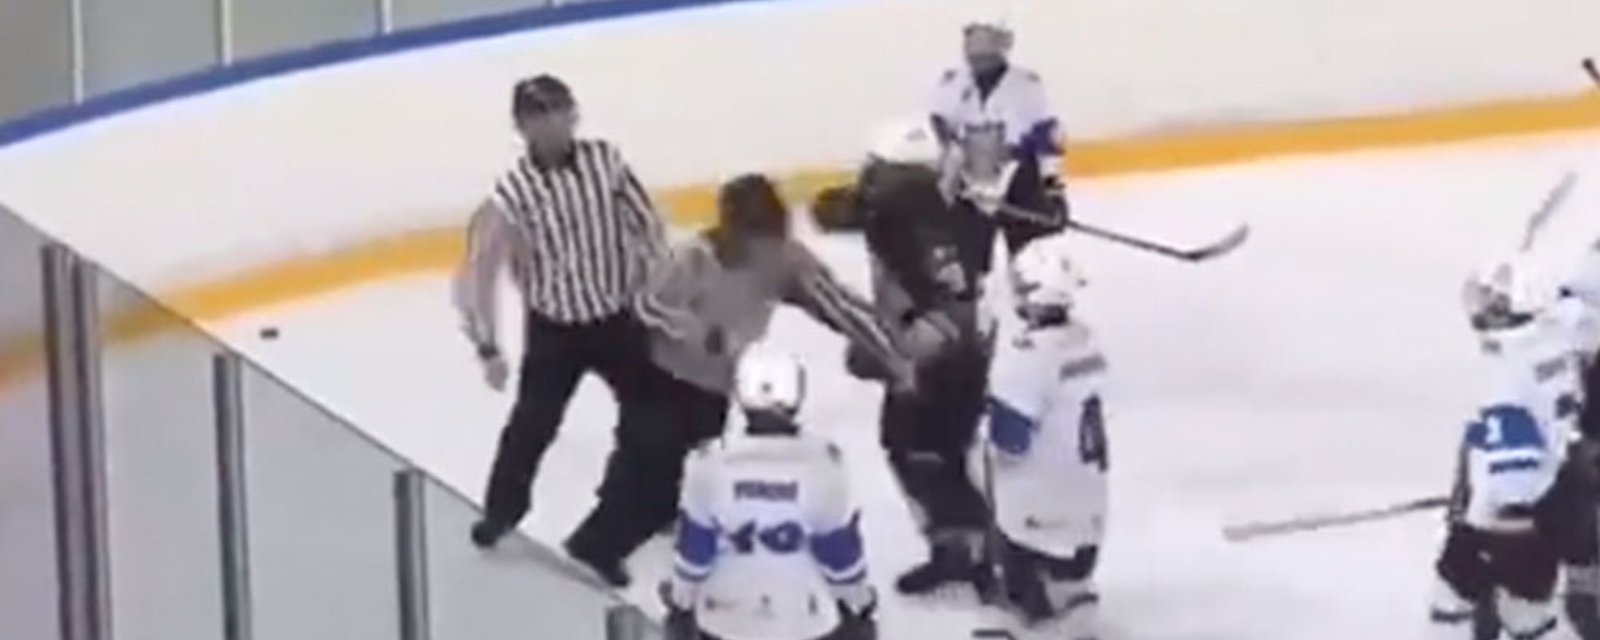 Youth player goes after both refs in crazy brawl